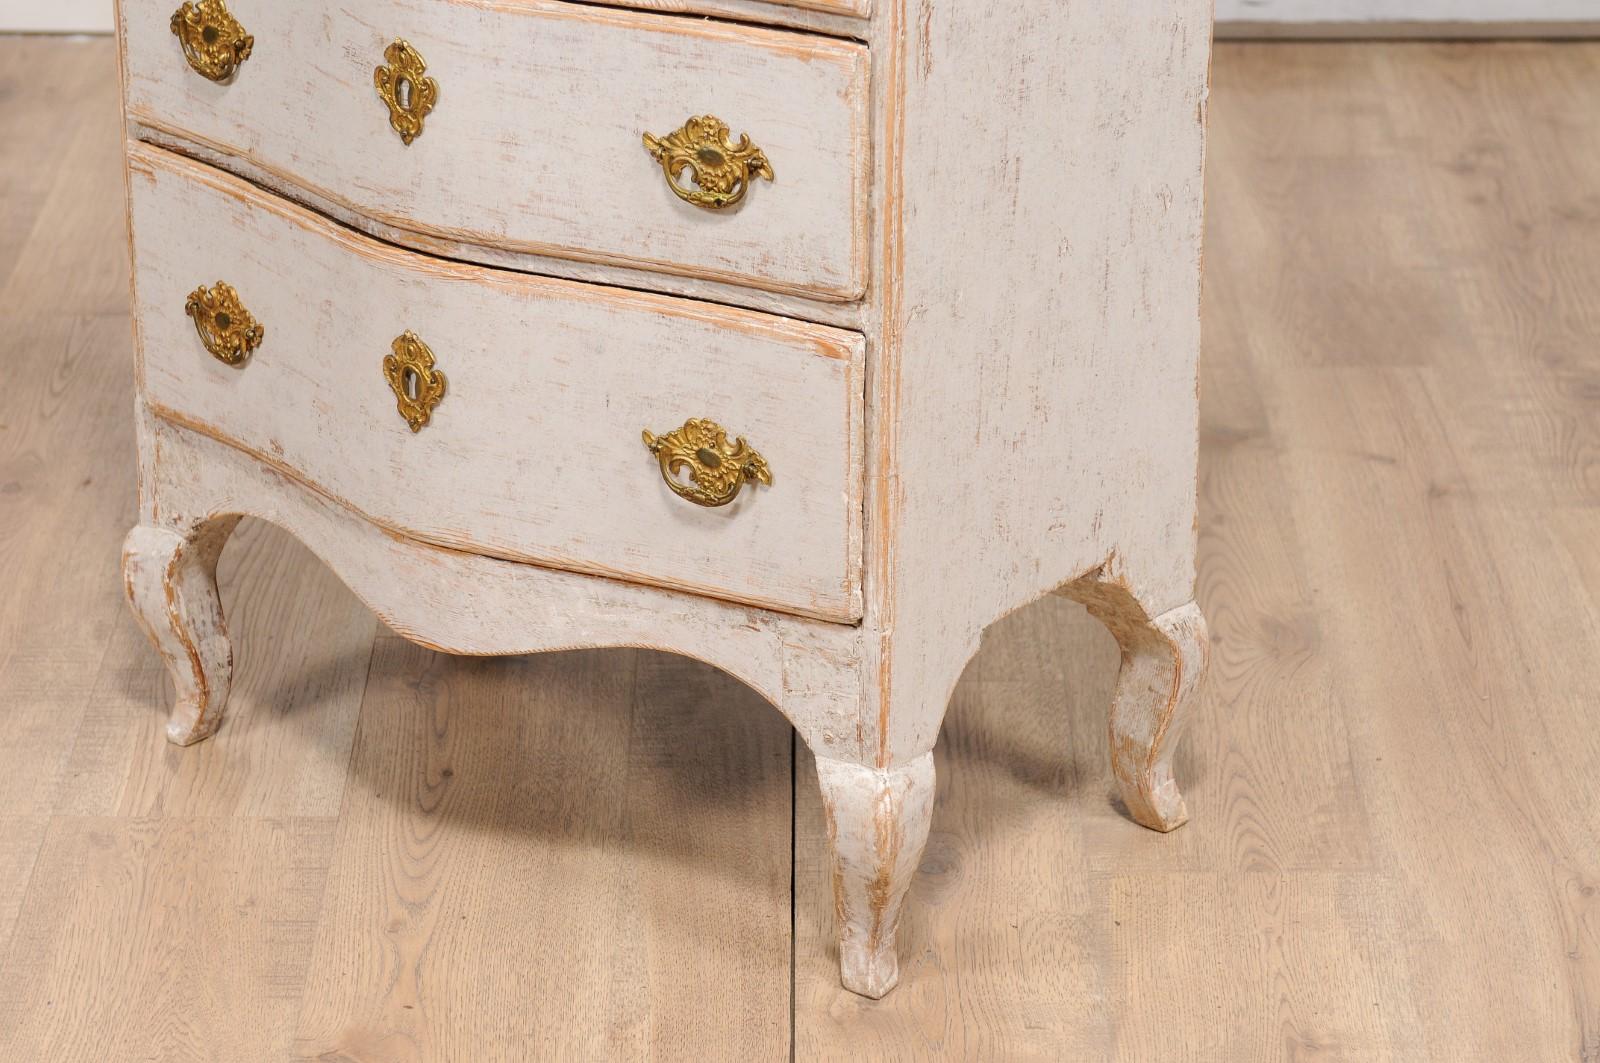 1760s Rococo Period Swedish Light Grey Painted Chest of Drawers with Pull-Out For Sale 7